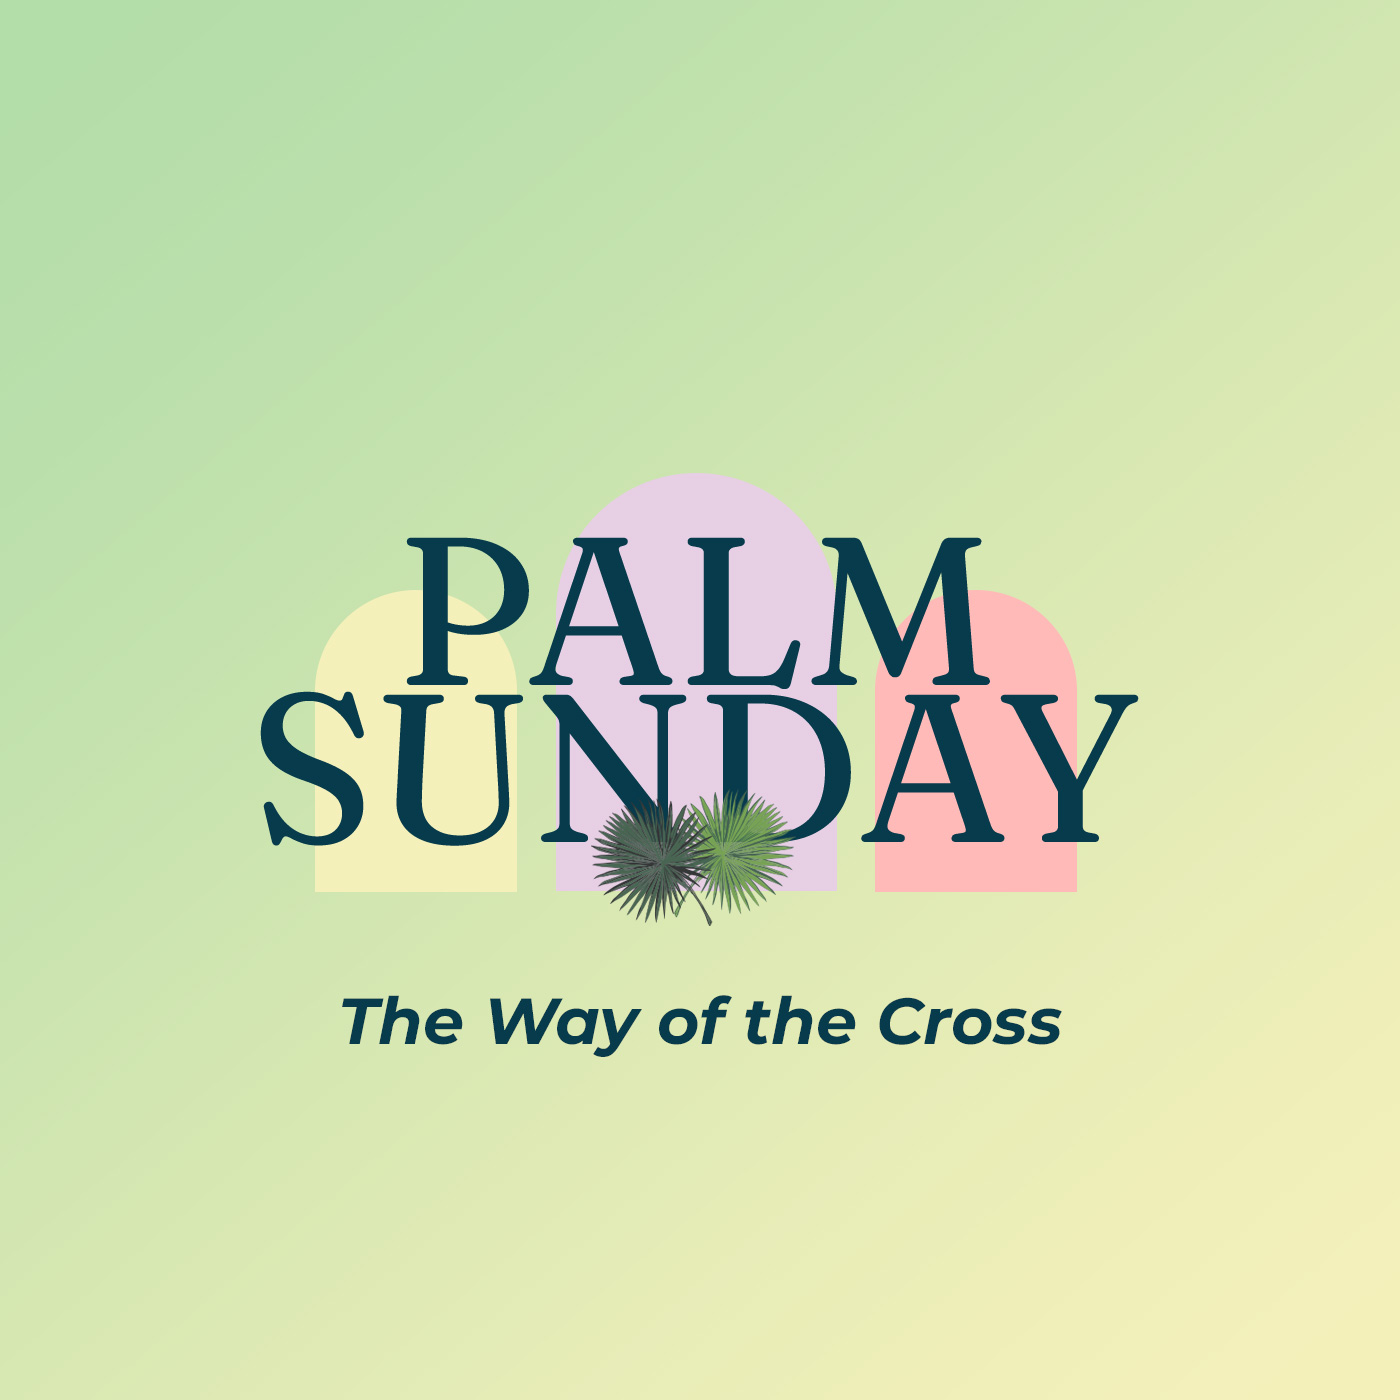 PALM SUNDAY - The Way of the Cross